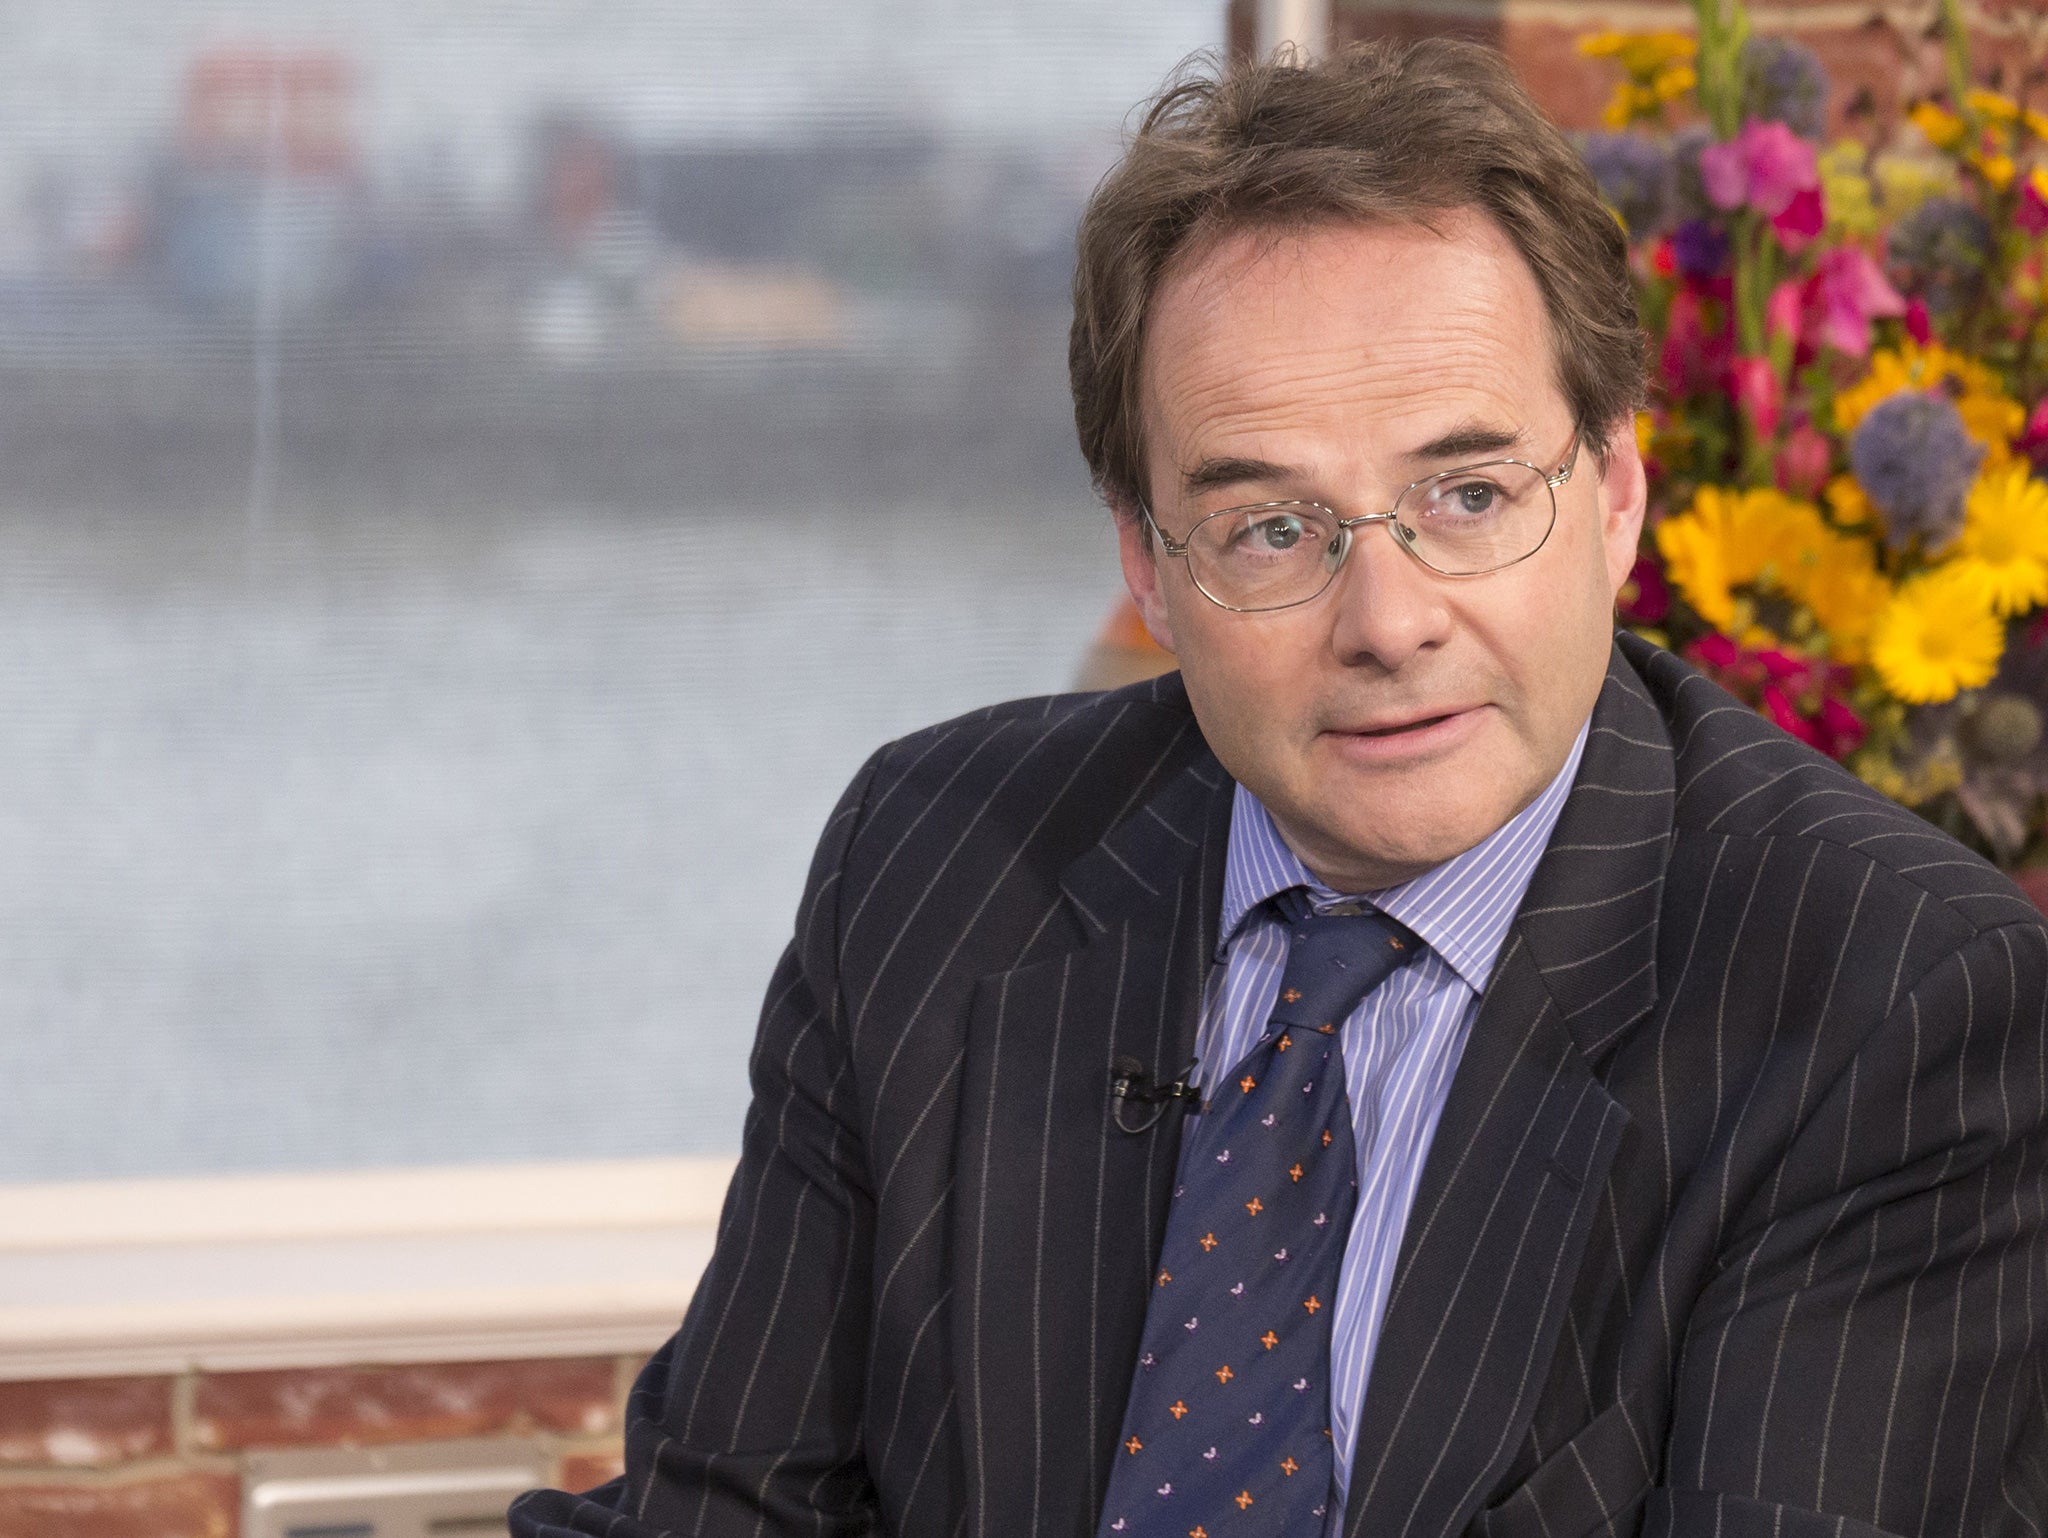 Quentin Letts, a writer for the Daily Mail, told the Trust that he did not have a particular position on climate change